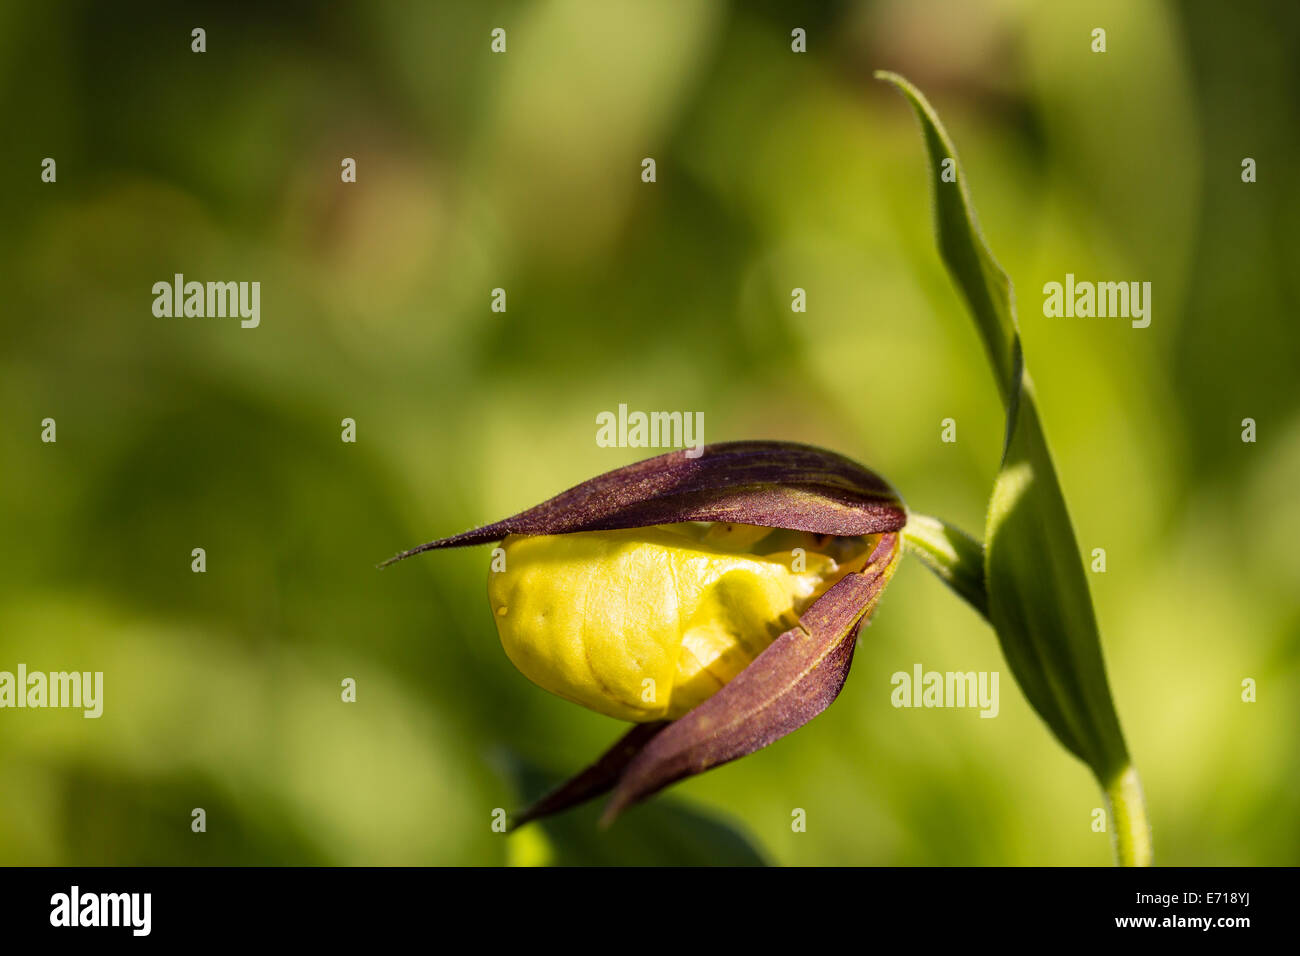 Germany, Hesse, Nature park Meissner, Yellow Lady's-slipper orchid, Cypripedium calceolus Stock Photo